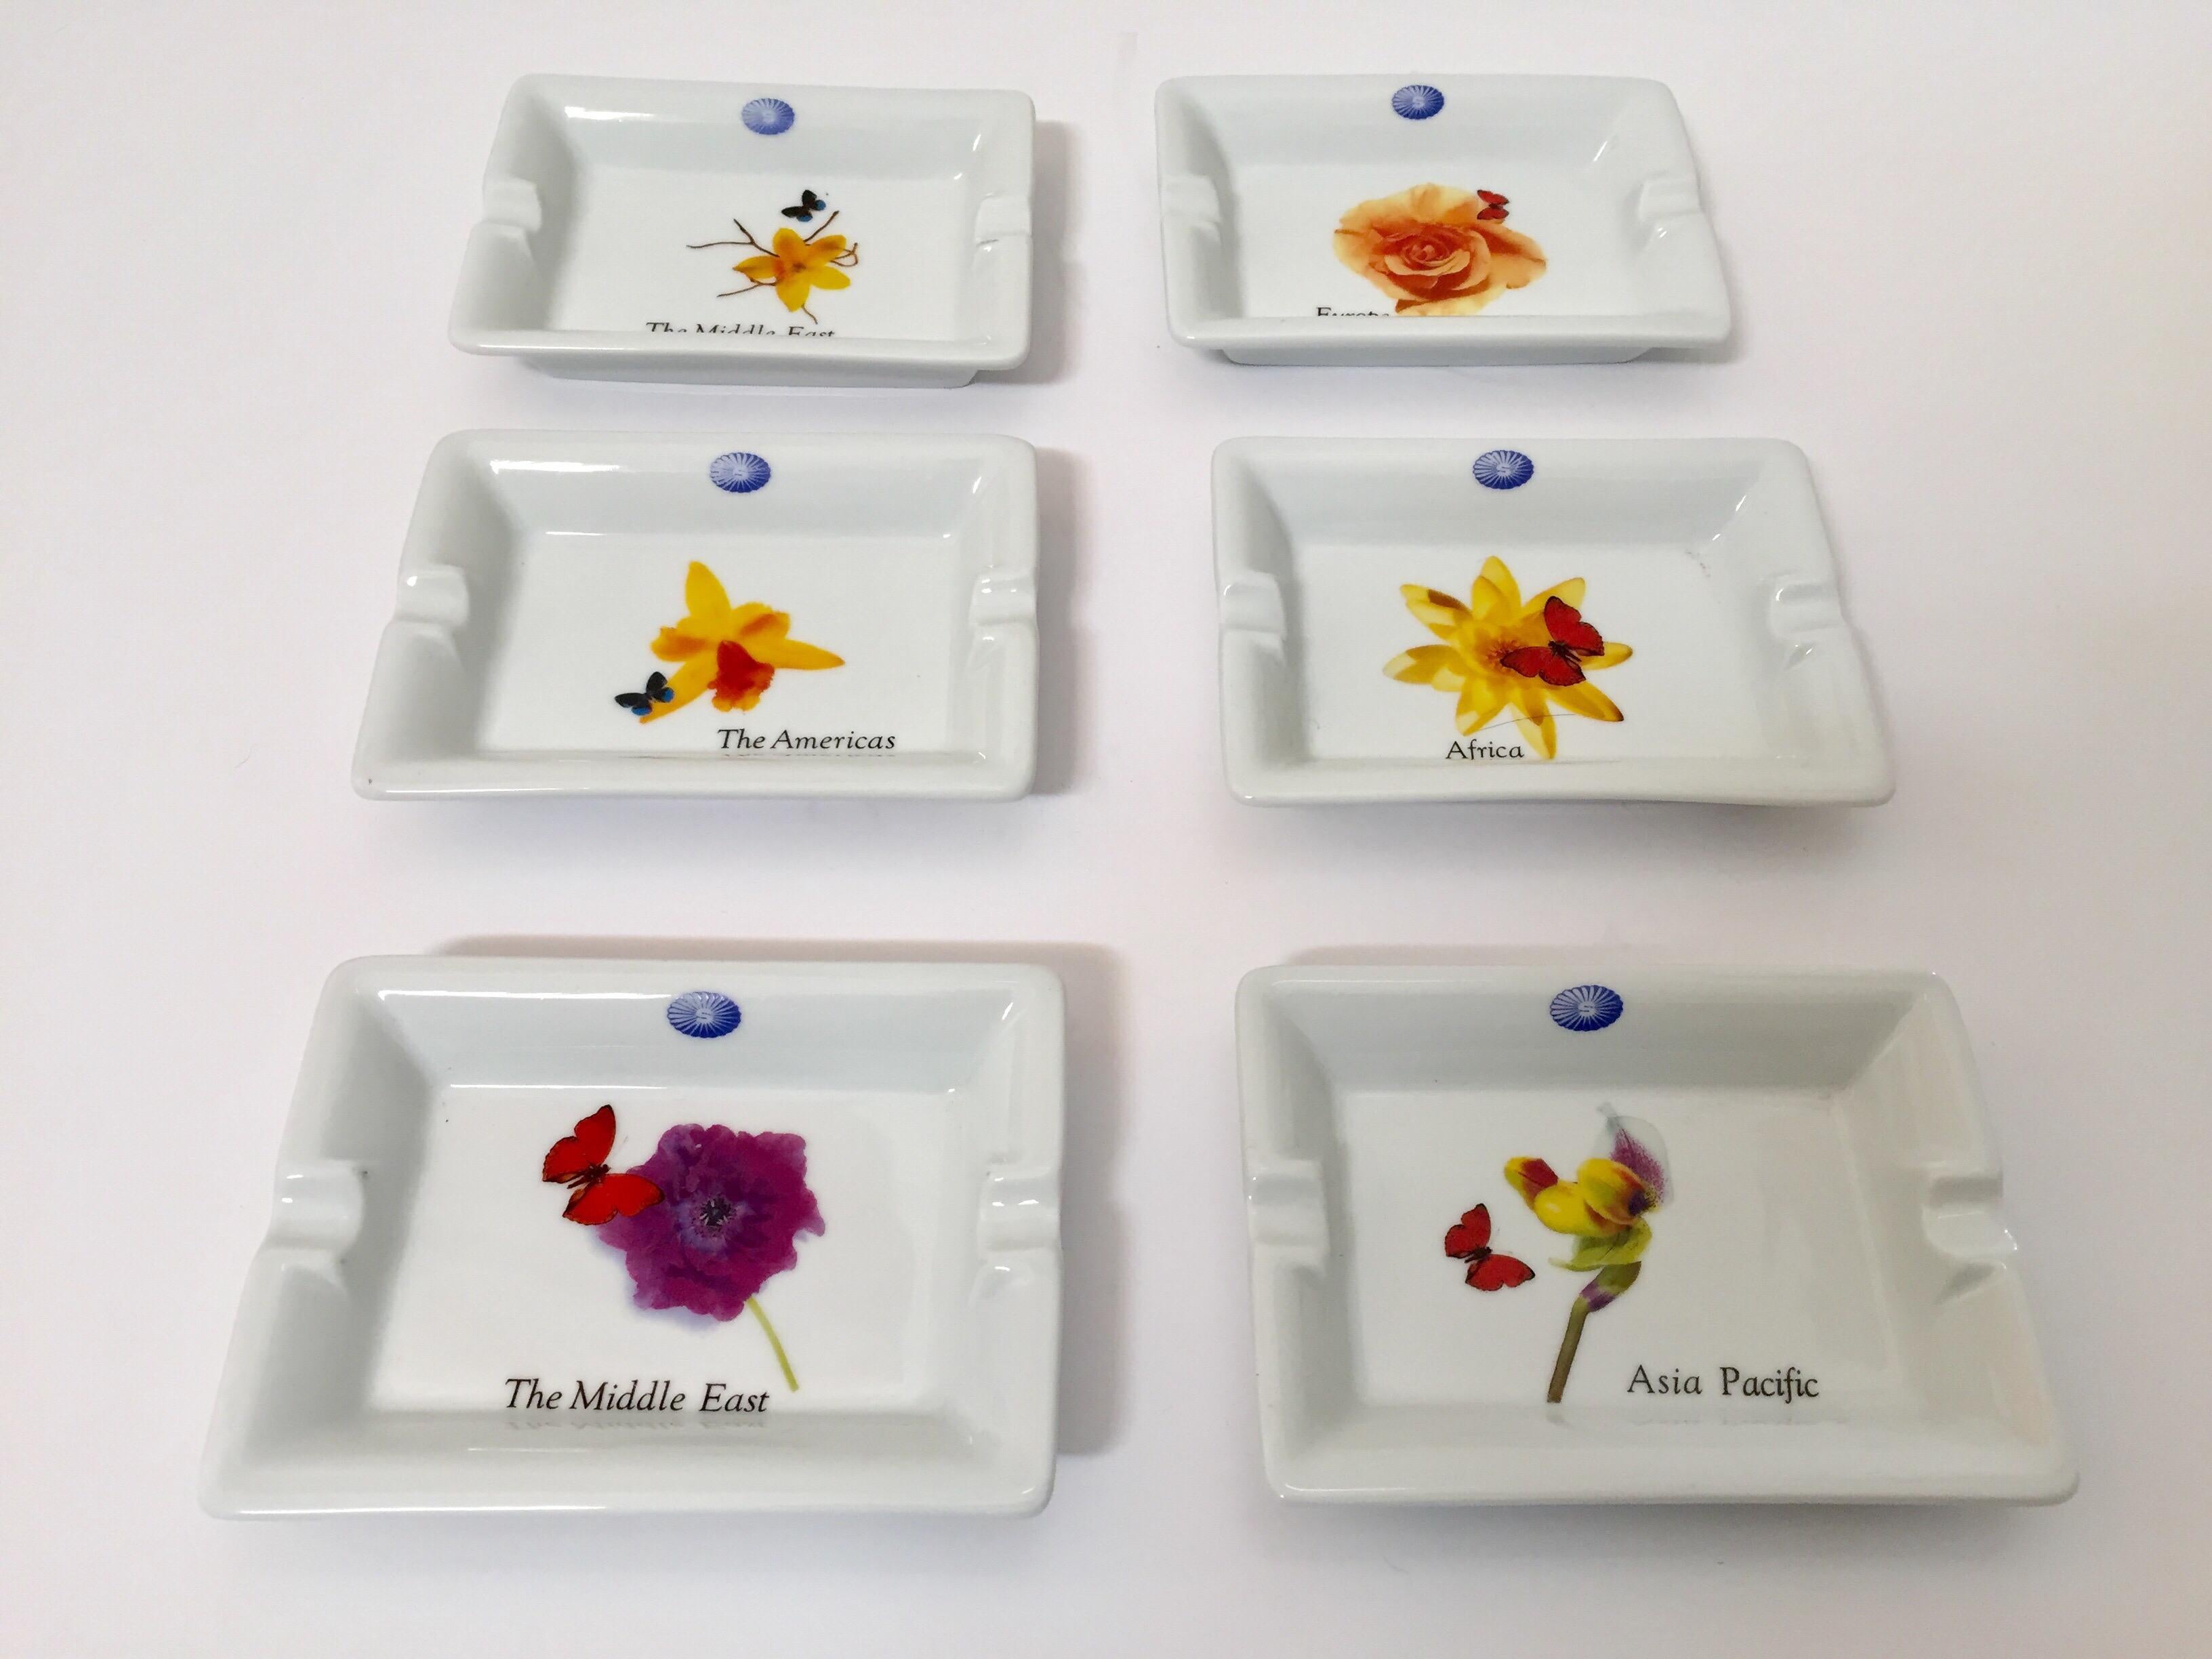 Vintage set of six collector porcelain ashtrays by Laufen Pillivuyt, France.
French Pillivuyt porcelain souvenir trinket, ashtray, vide poche or pin dish from the luxurious Sheraton Hotel & Resorts.
This simple white hand painted porcelain are